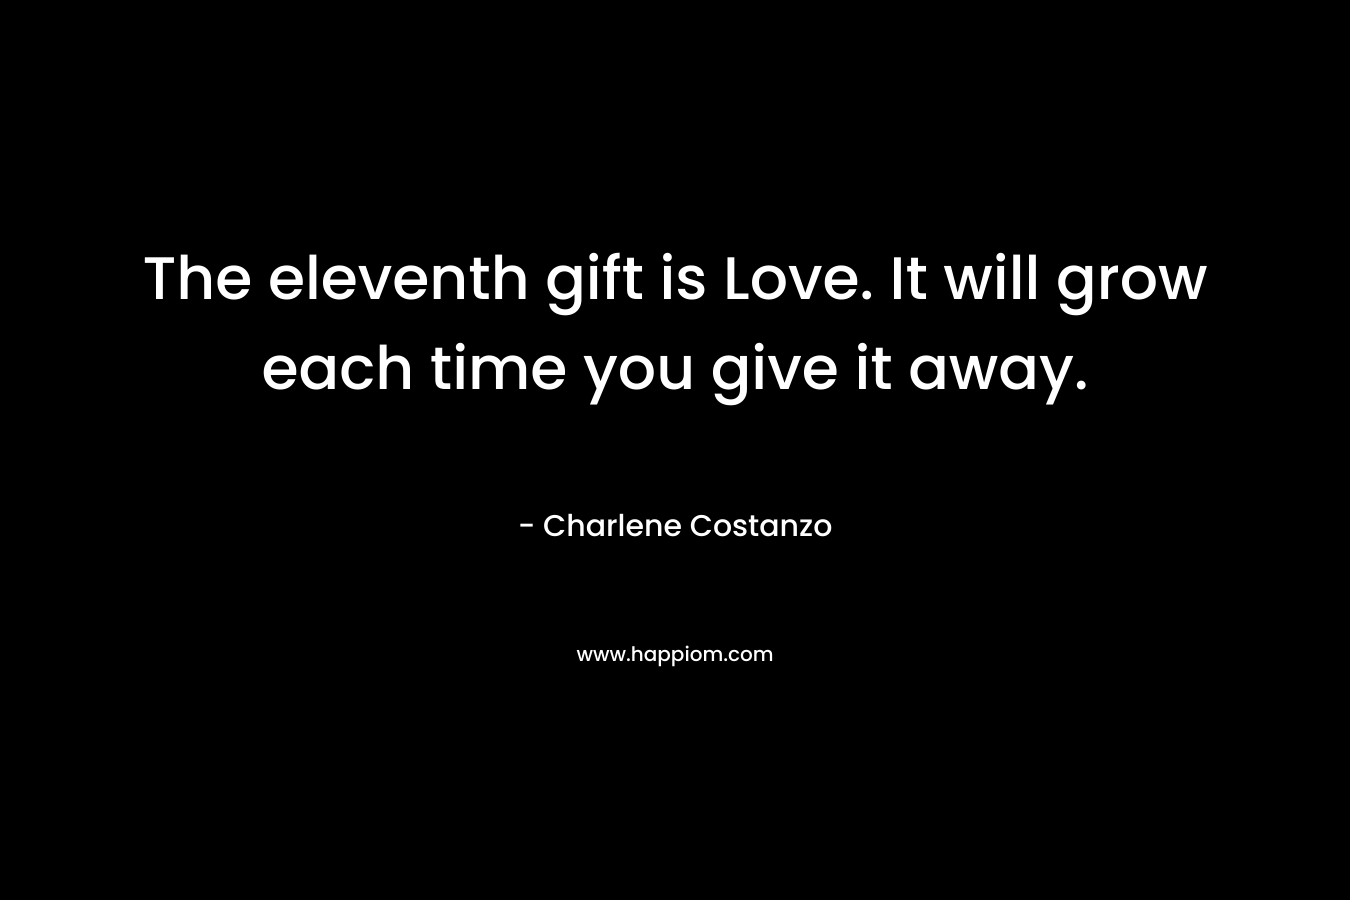 The eleventh gift is Love. It will grow each time you give it away. – Charlene Costanzo